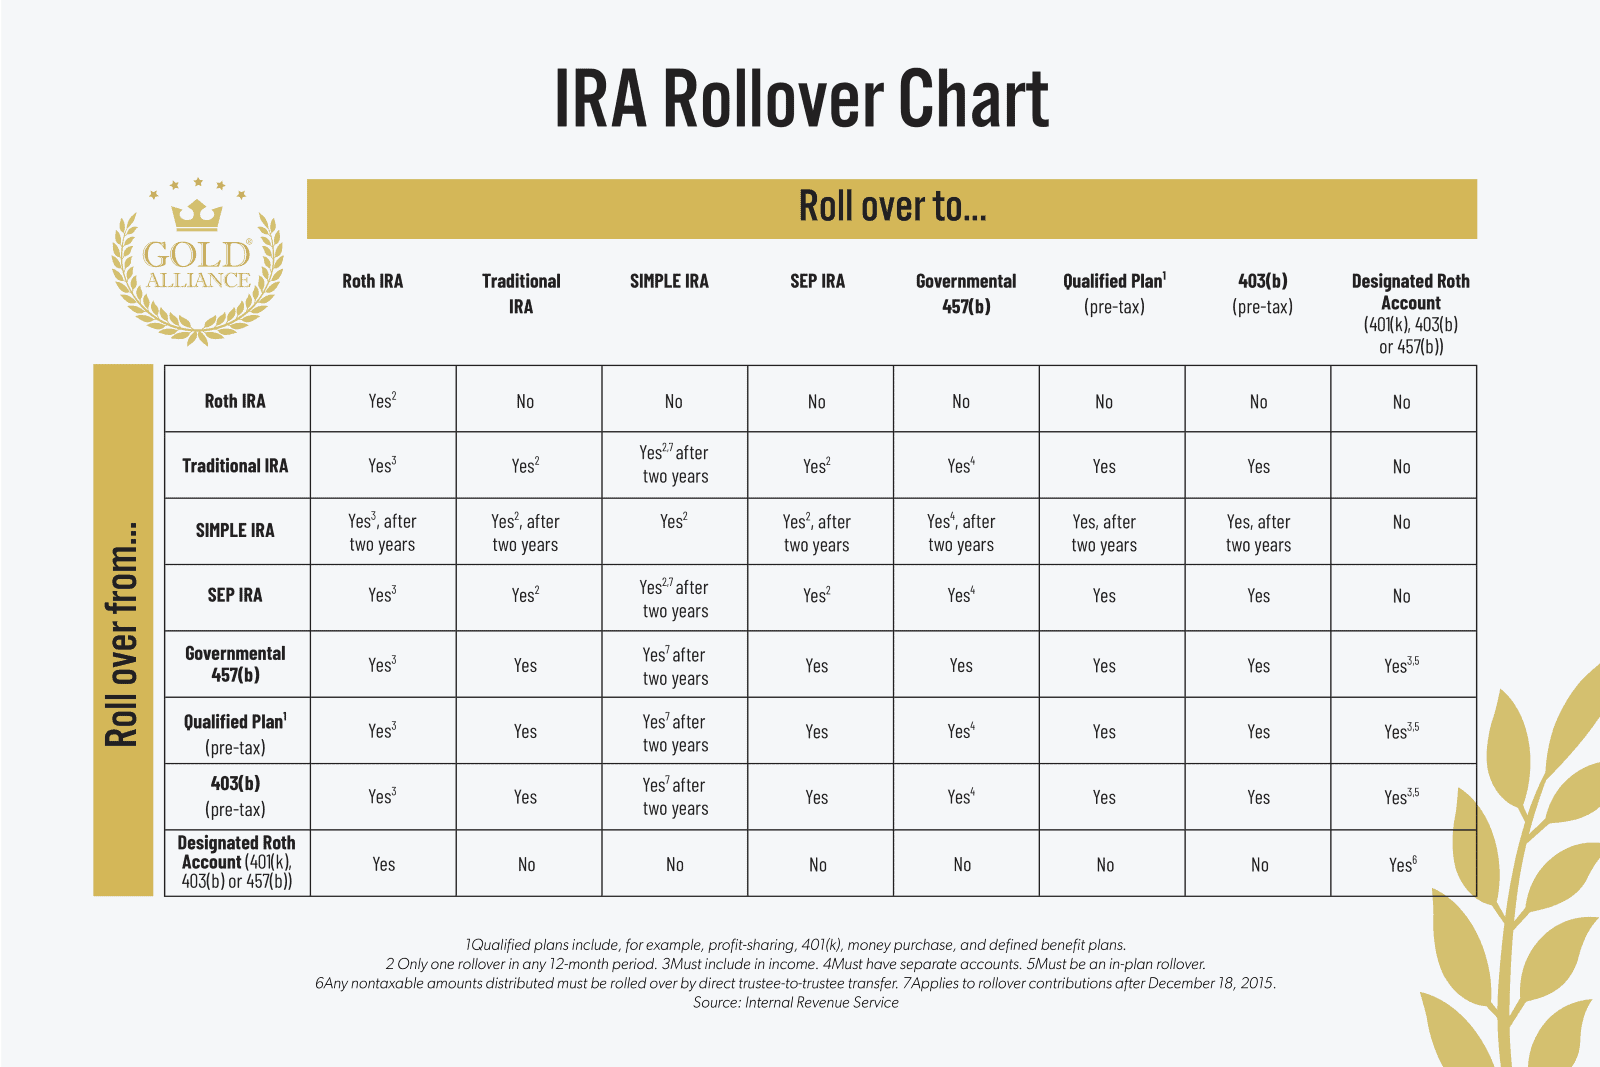 IRA Rollover Chart. This chart shows all the different ways you can roll over your IRA including Roth IRA, traditional IRA, simple IRA, SEP IRA, governmental 457(b), qualified plan, 403(b), and designated roth account such as 401(k)